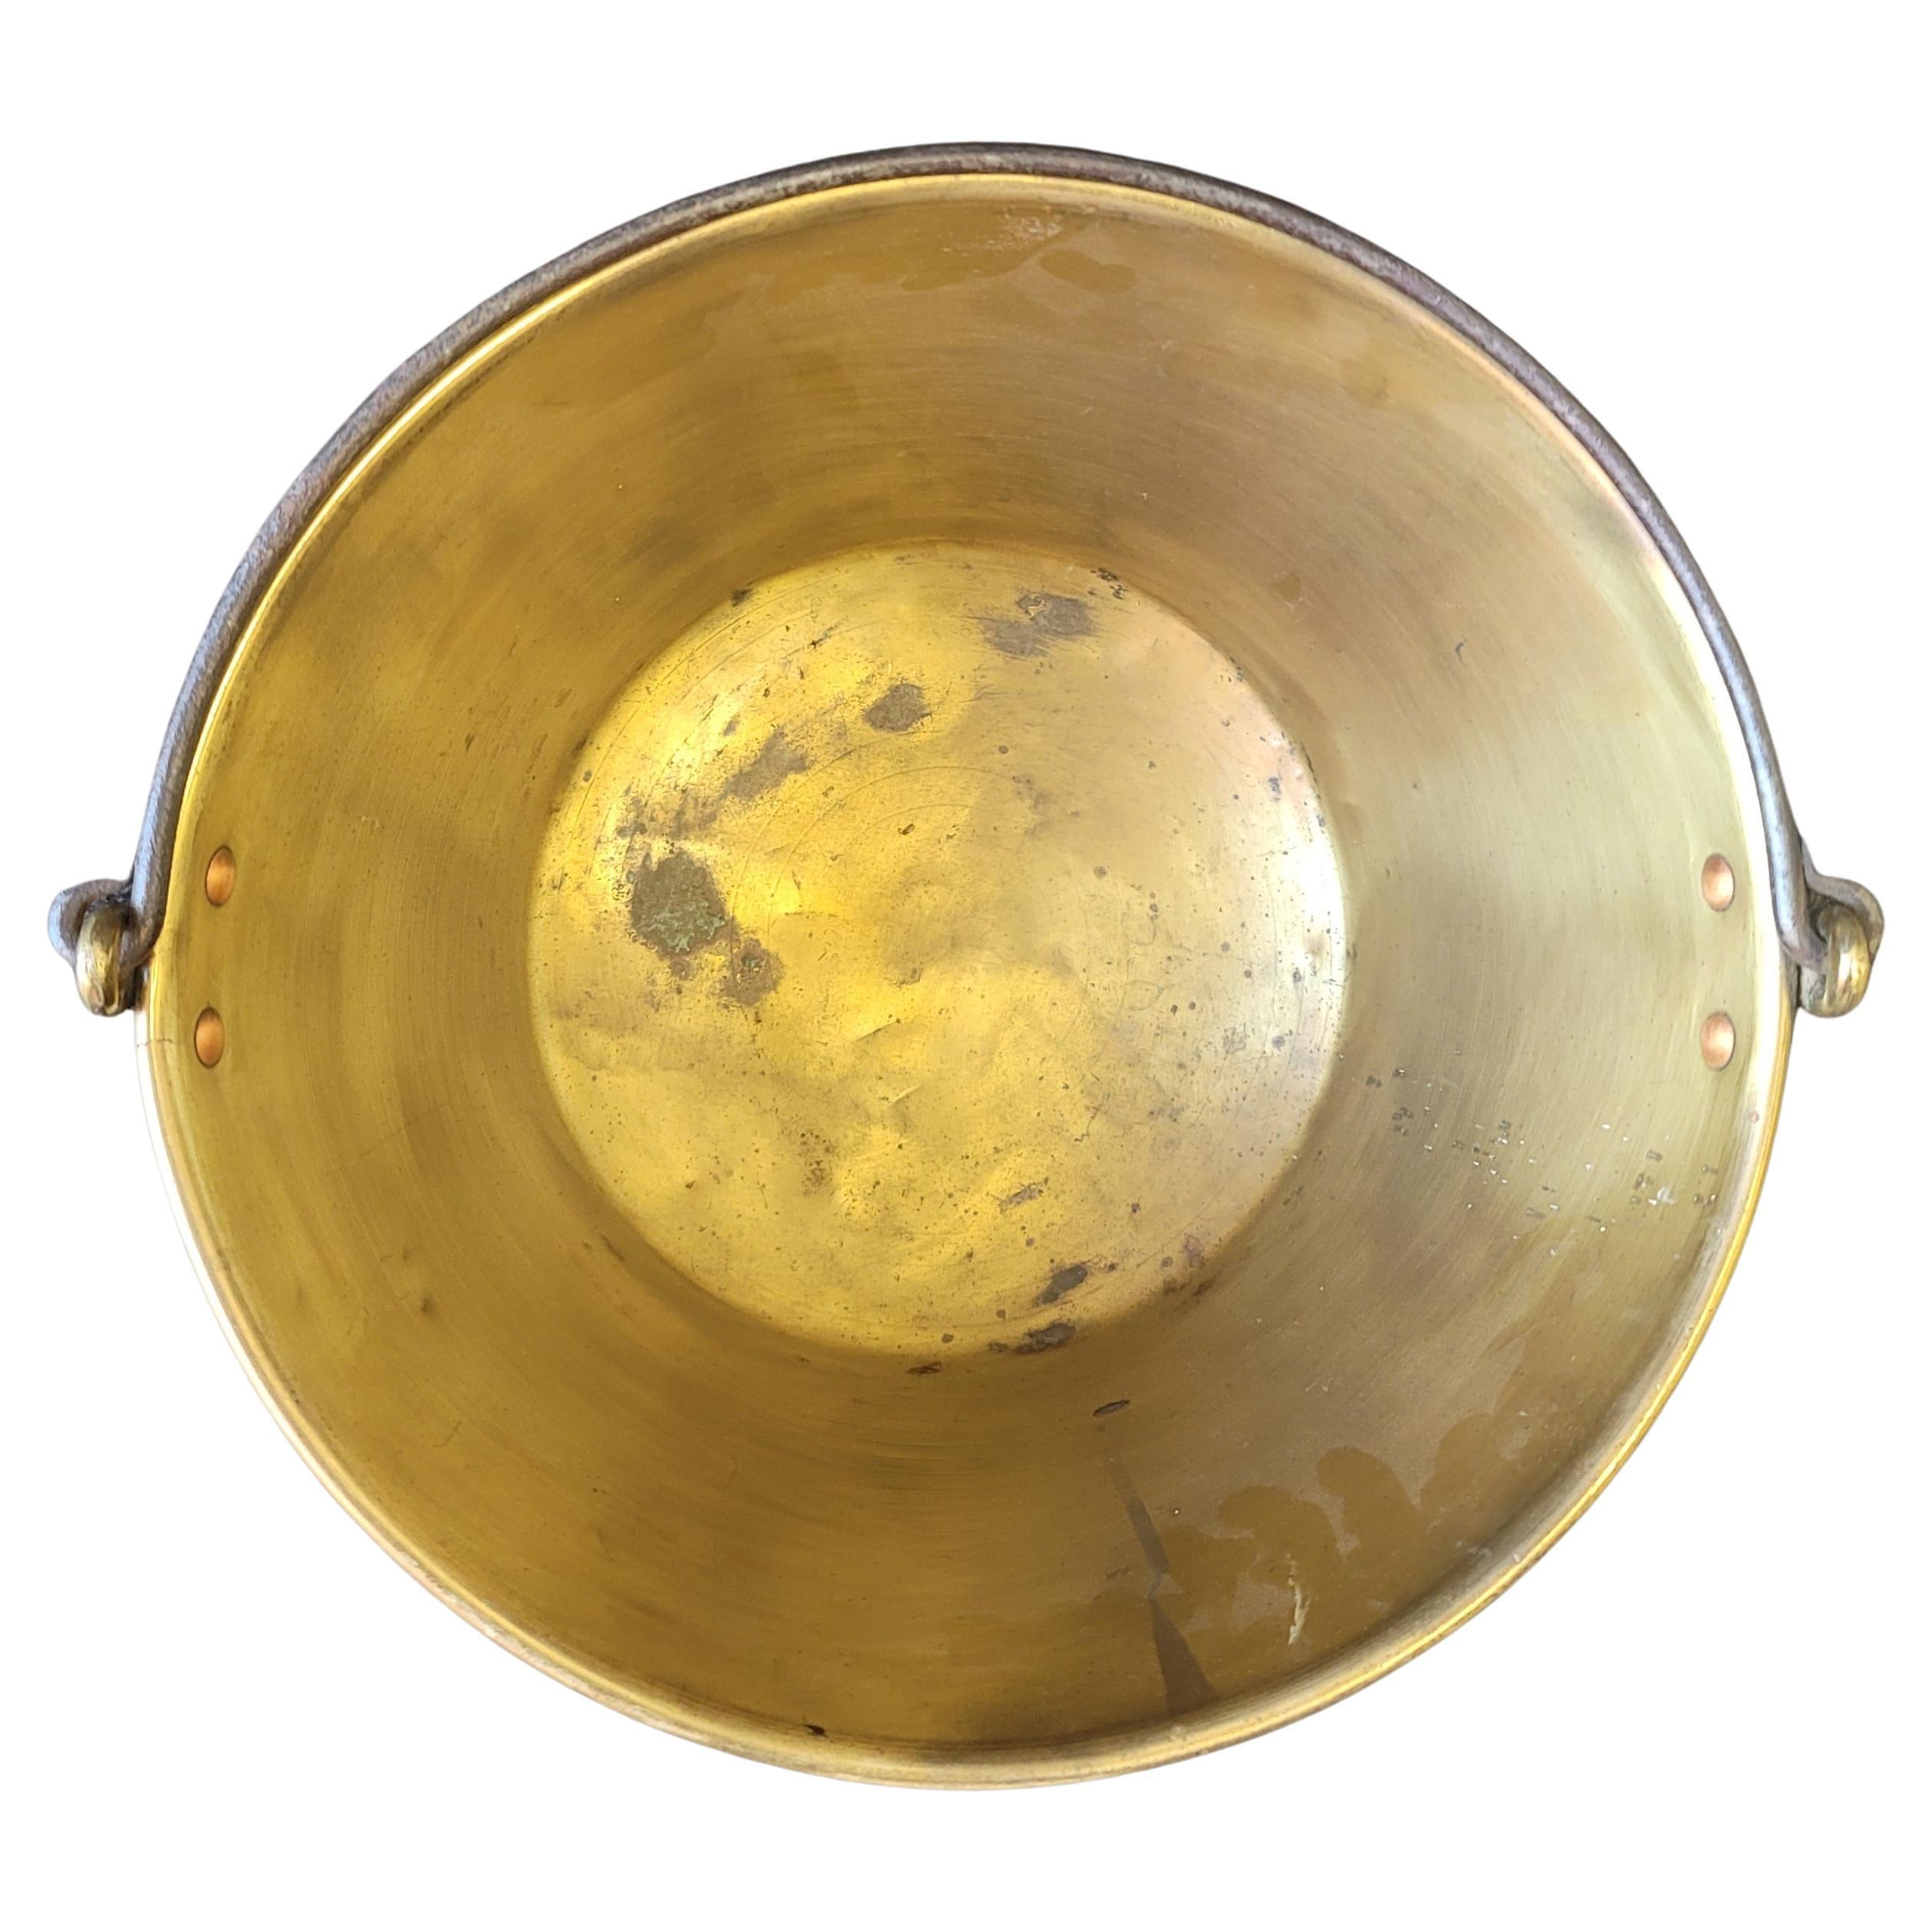 1851 Hayden Pat. Ansonia Brass Co. Bail Brass Fireplace Bucket / Planter In Good Condition For Sale In Germantown, MD